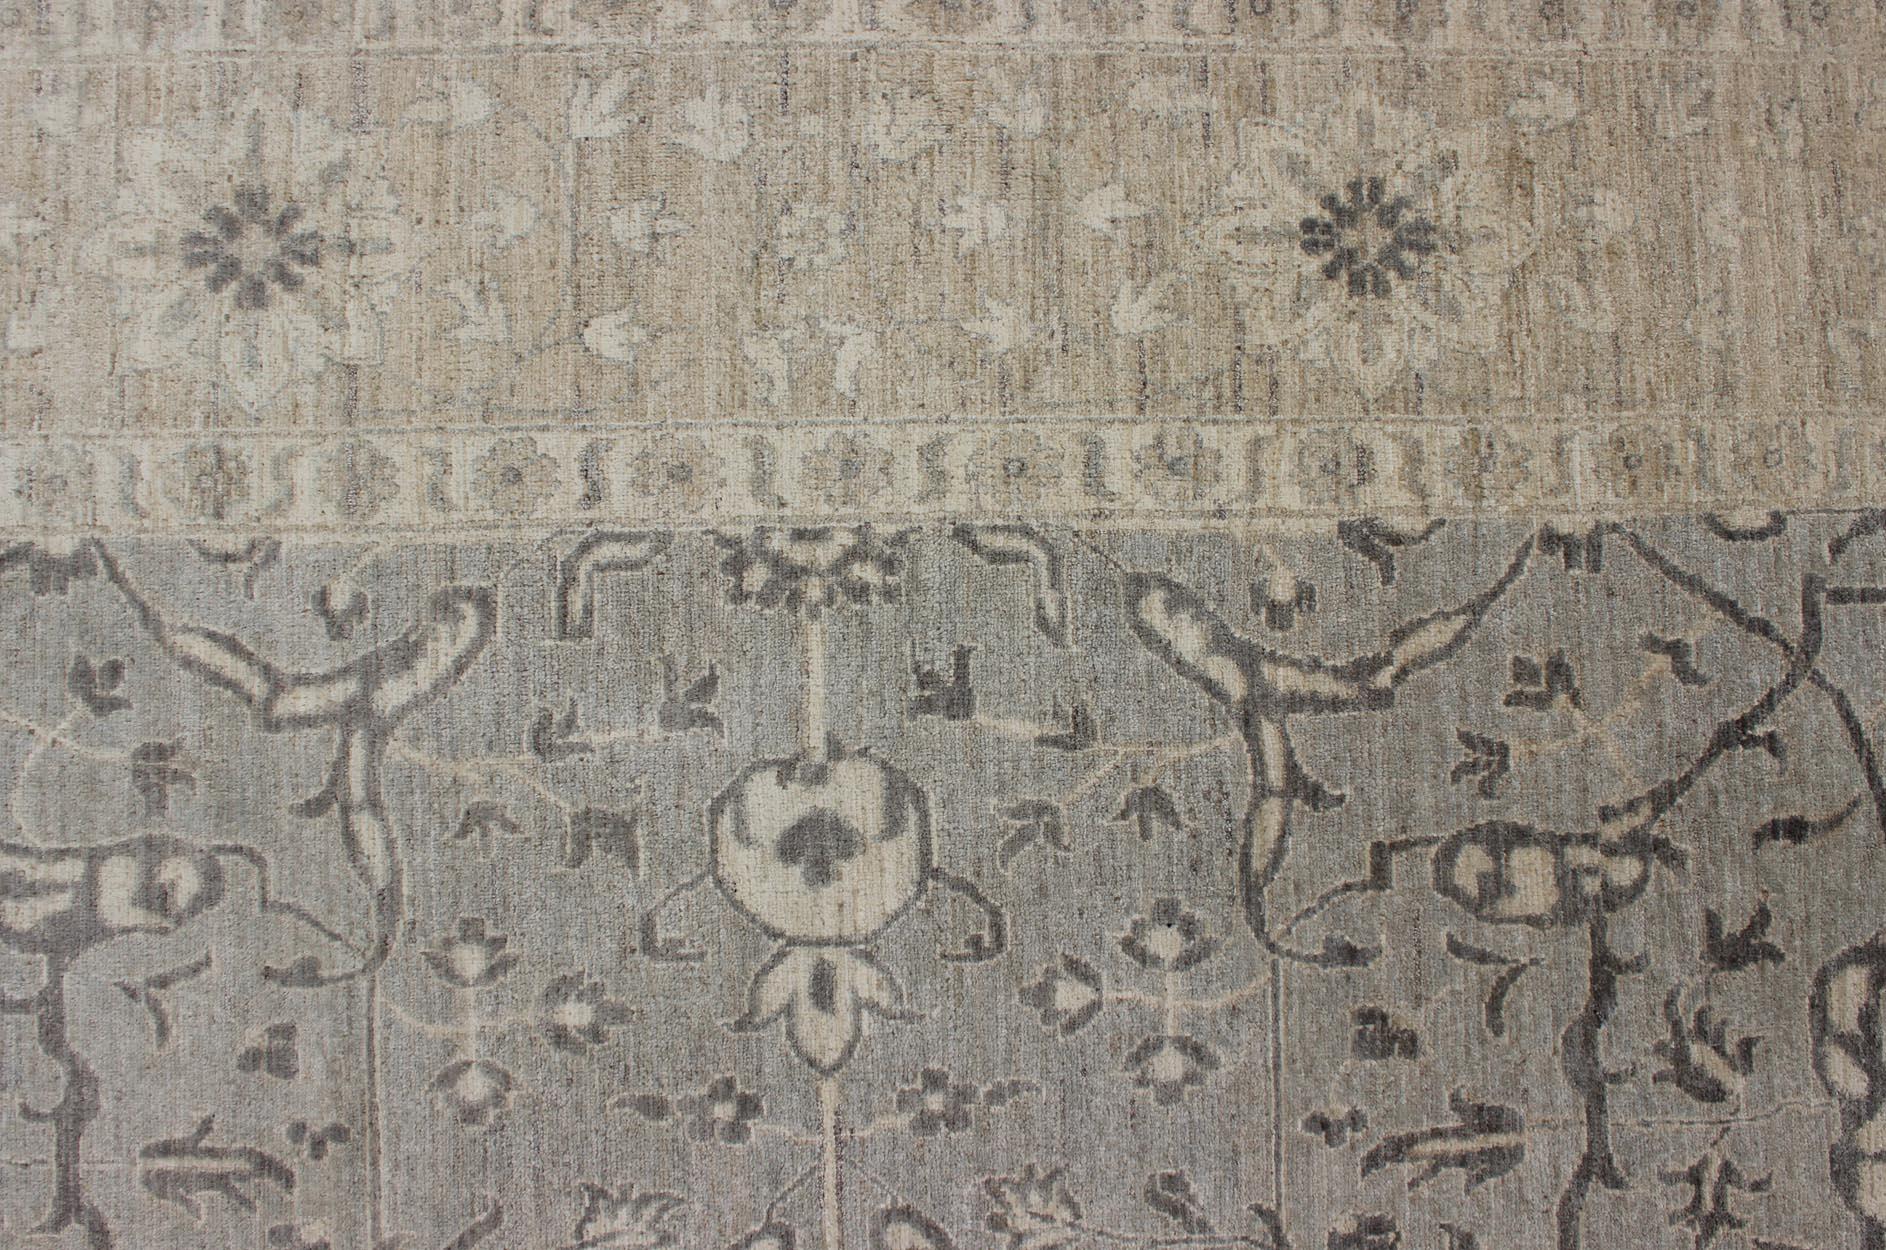 Charming Tabriz Design Rug with All-Over Design in Gray's, Tan, and Cream For Sale 2